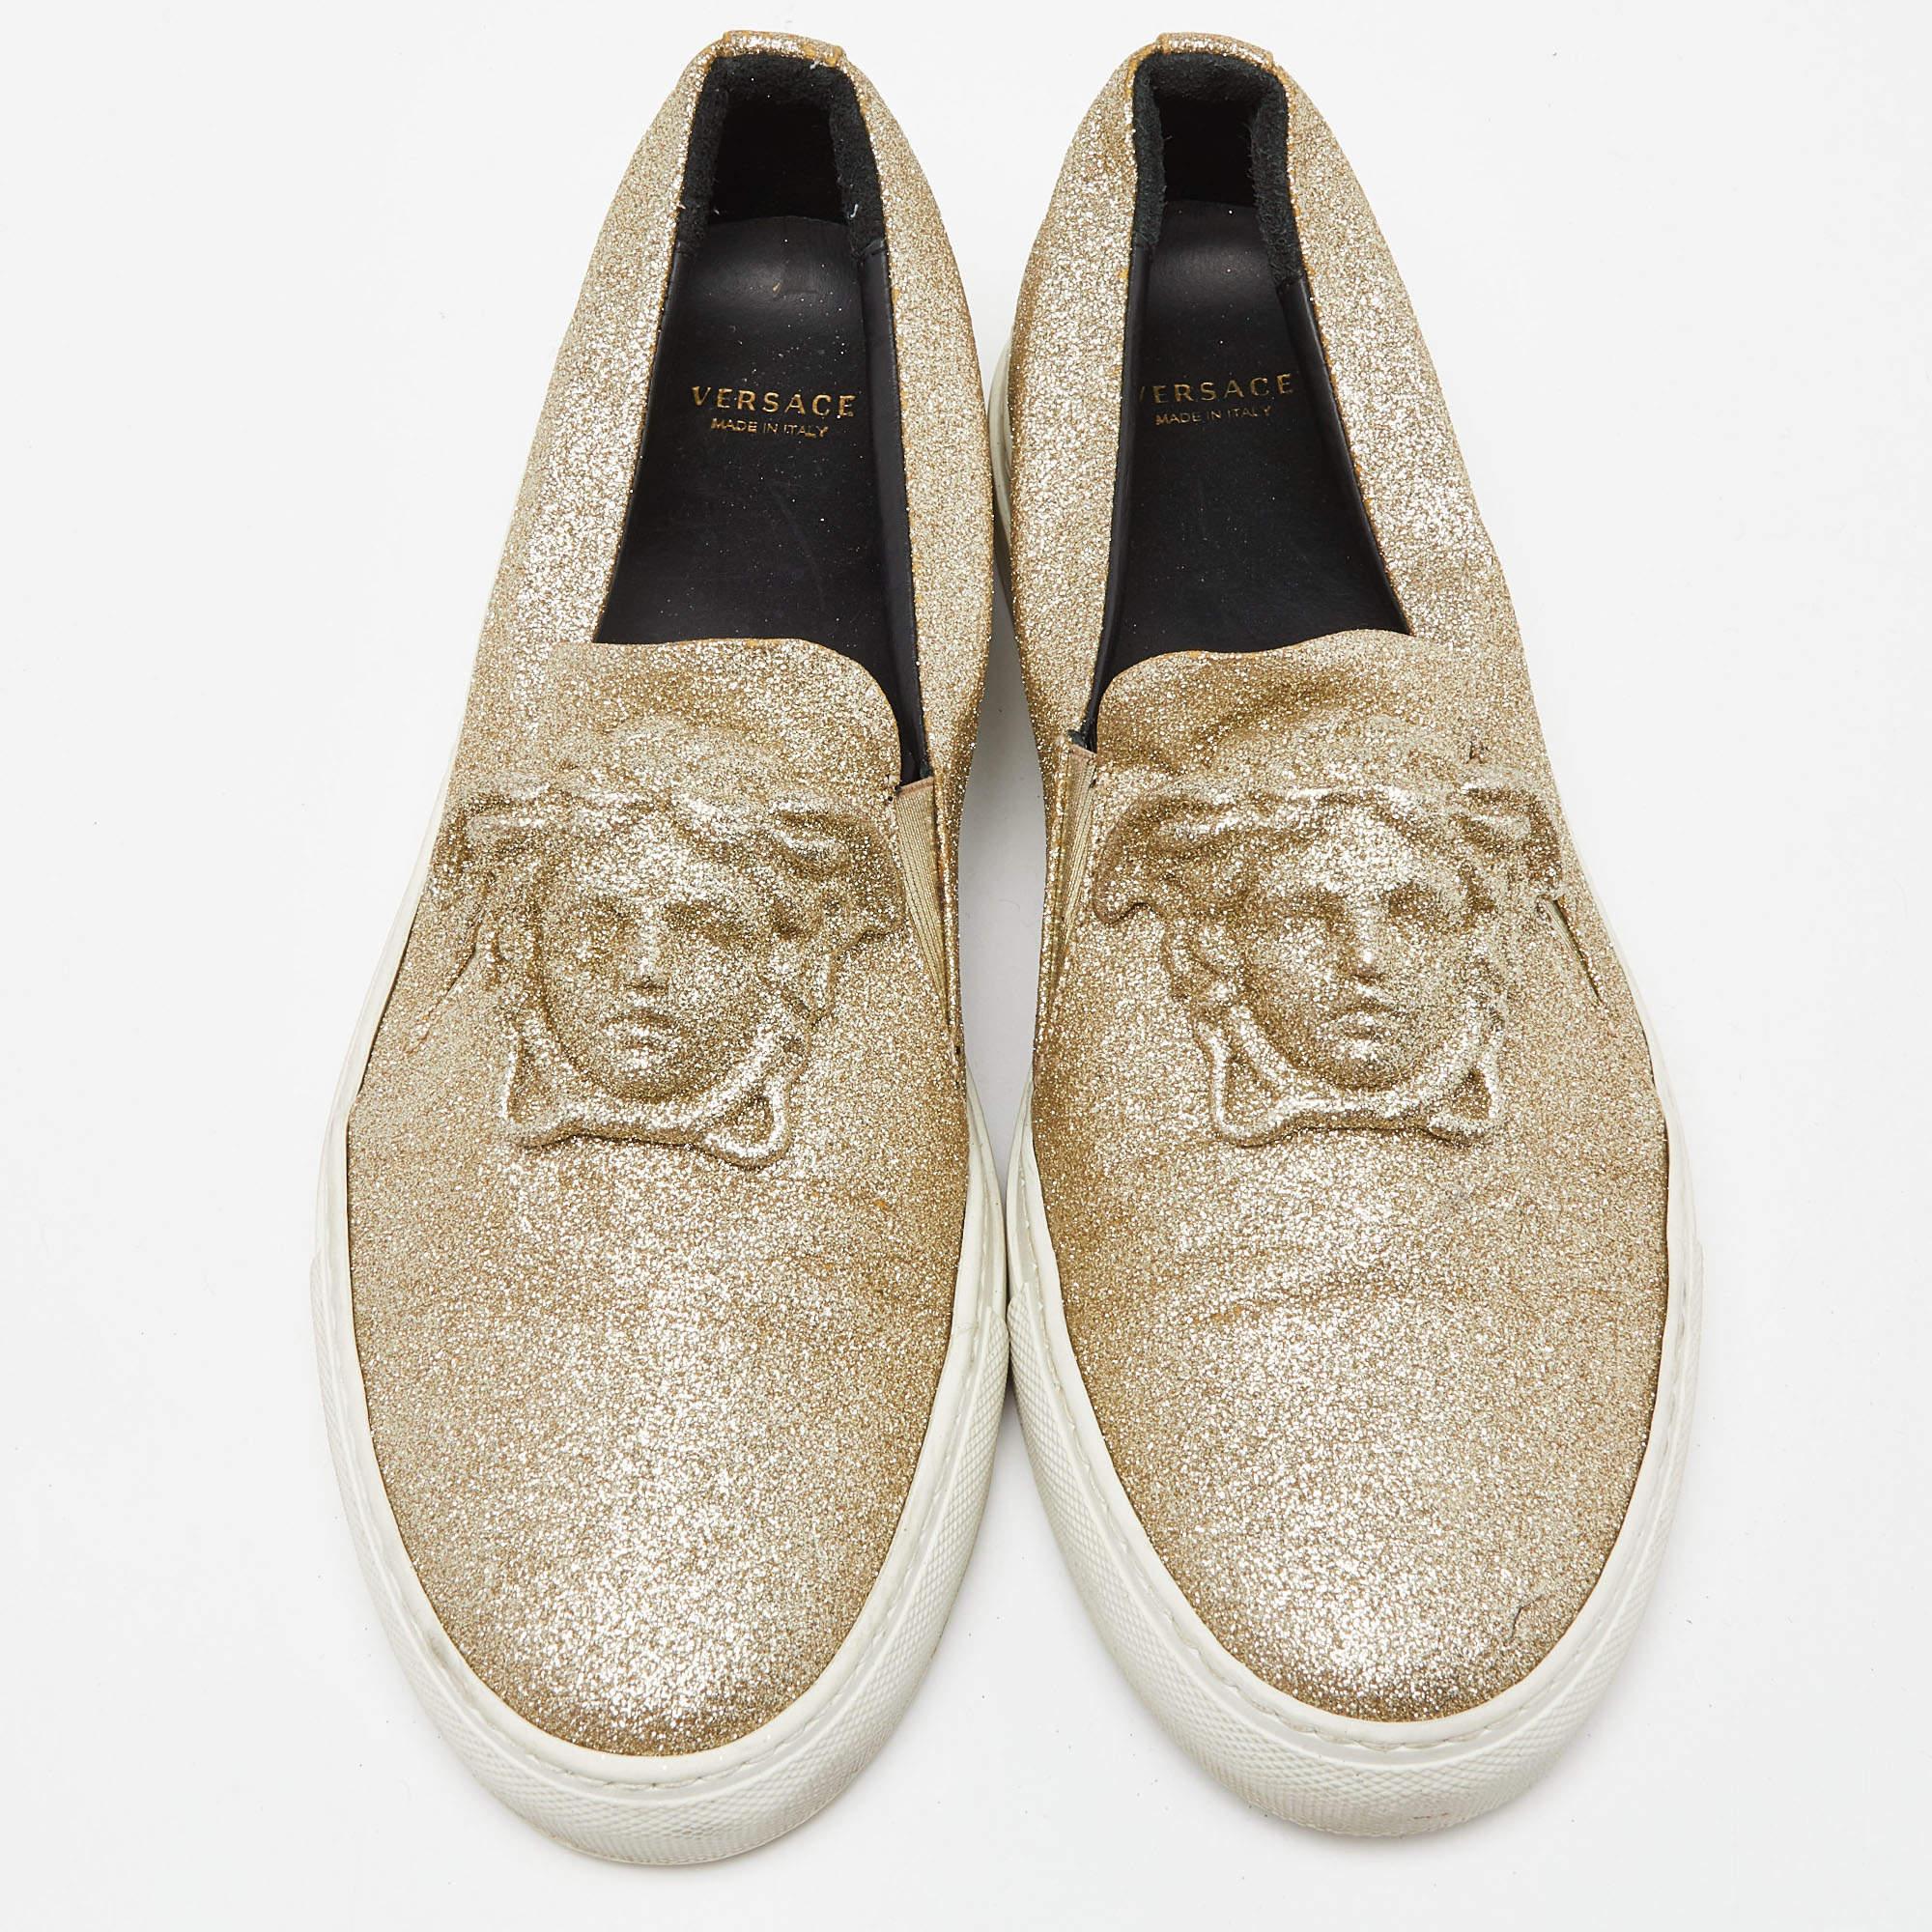 Versace Gold Glitter Palazzo Medusa Slip On Sneakers Size 41 For Sale 1